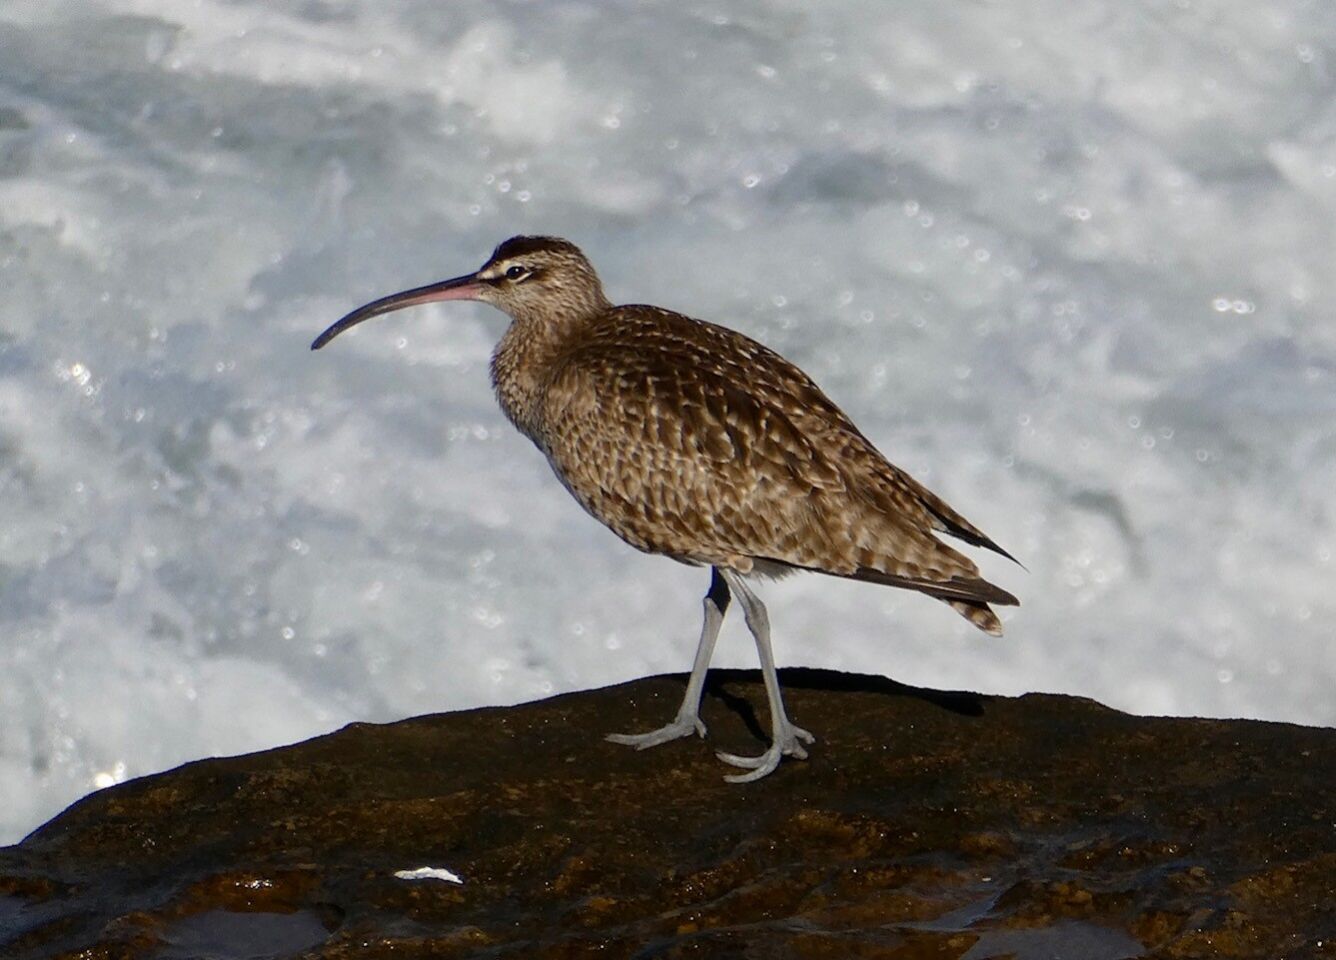 A whimbrel — a type of curlew — surveys the scene oceanside.